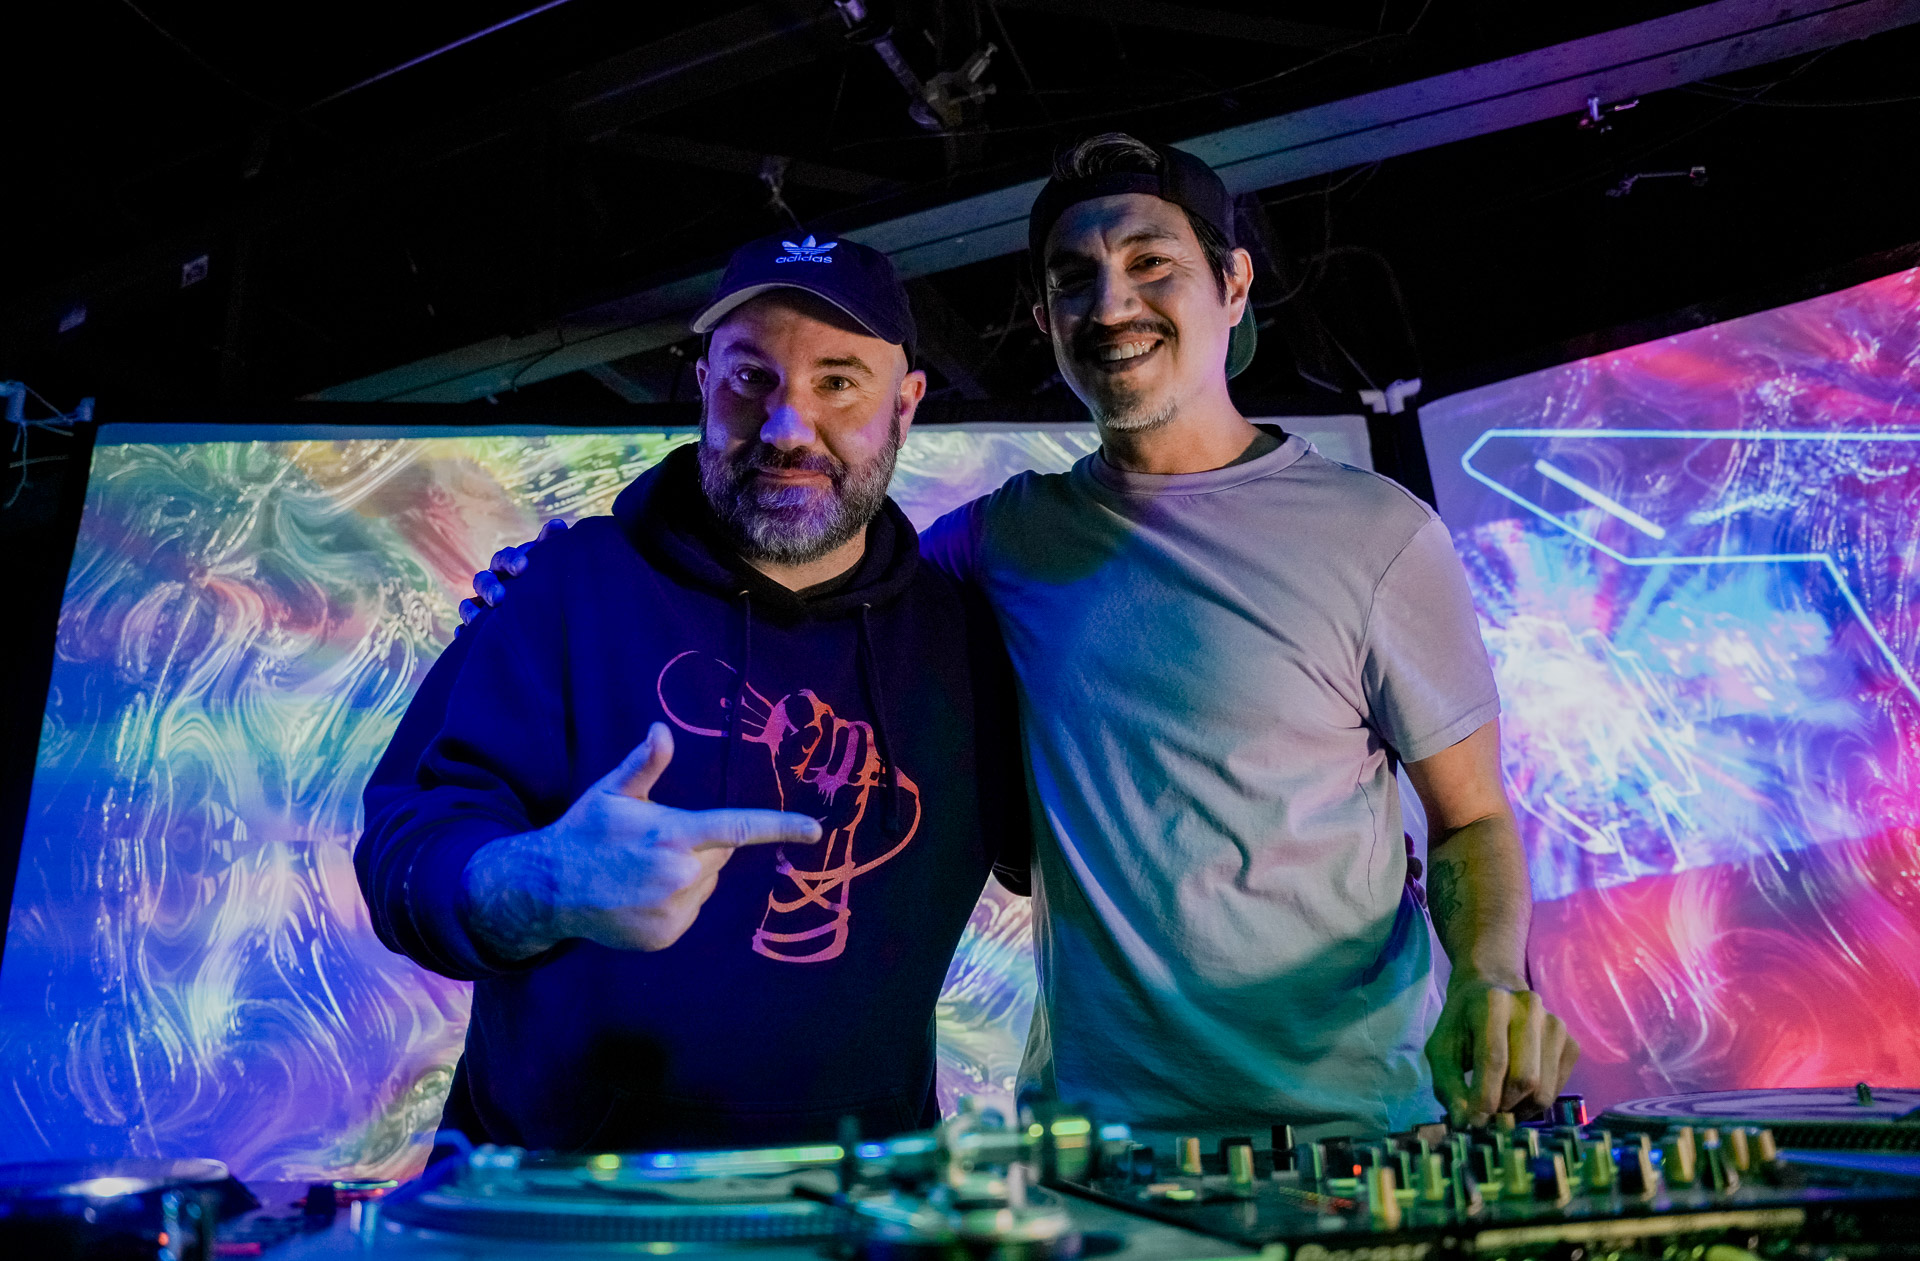 Two djs smiling onstage